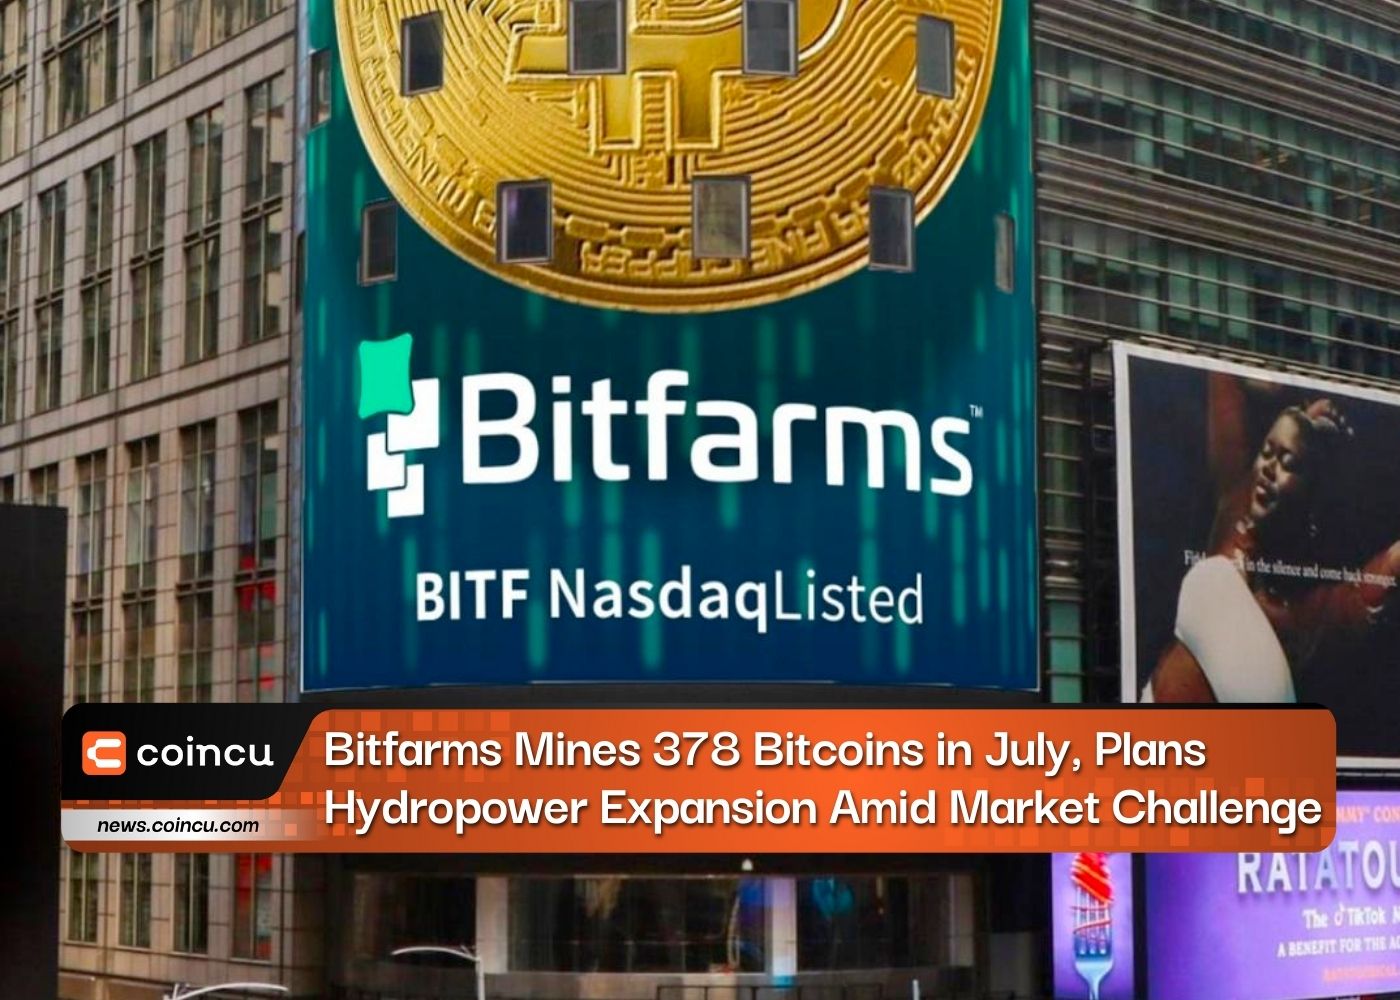 Bitfarms Mines 378 Bitcoins in July, Plans Hydropower Expansion Amid Market Challenge